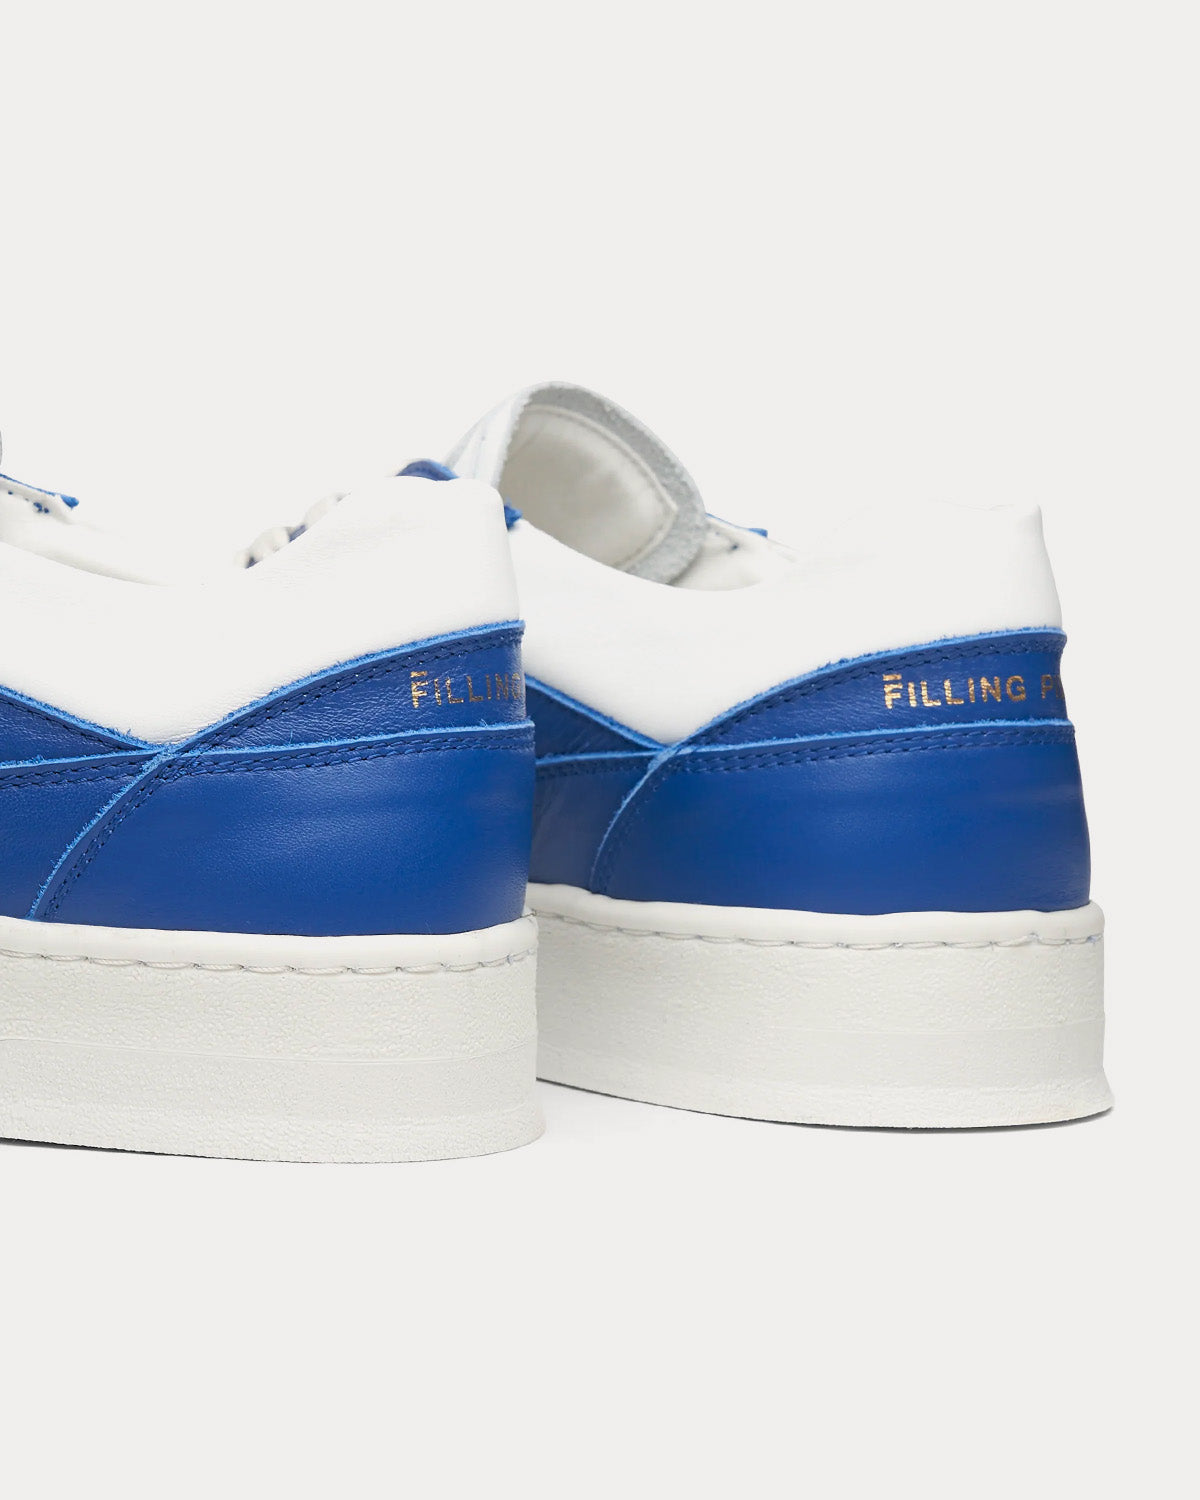 Filling Pieces - Ace Spin Denim Blue Low Top Sneakers